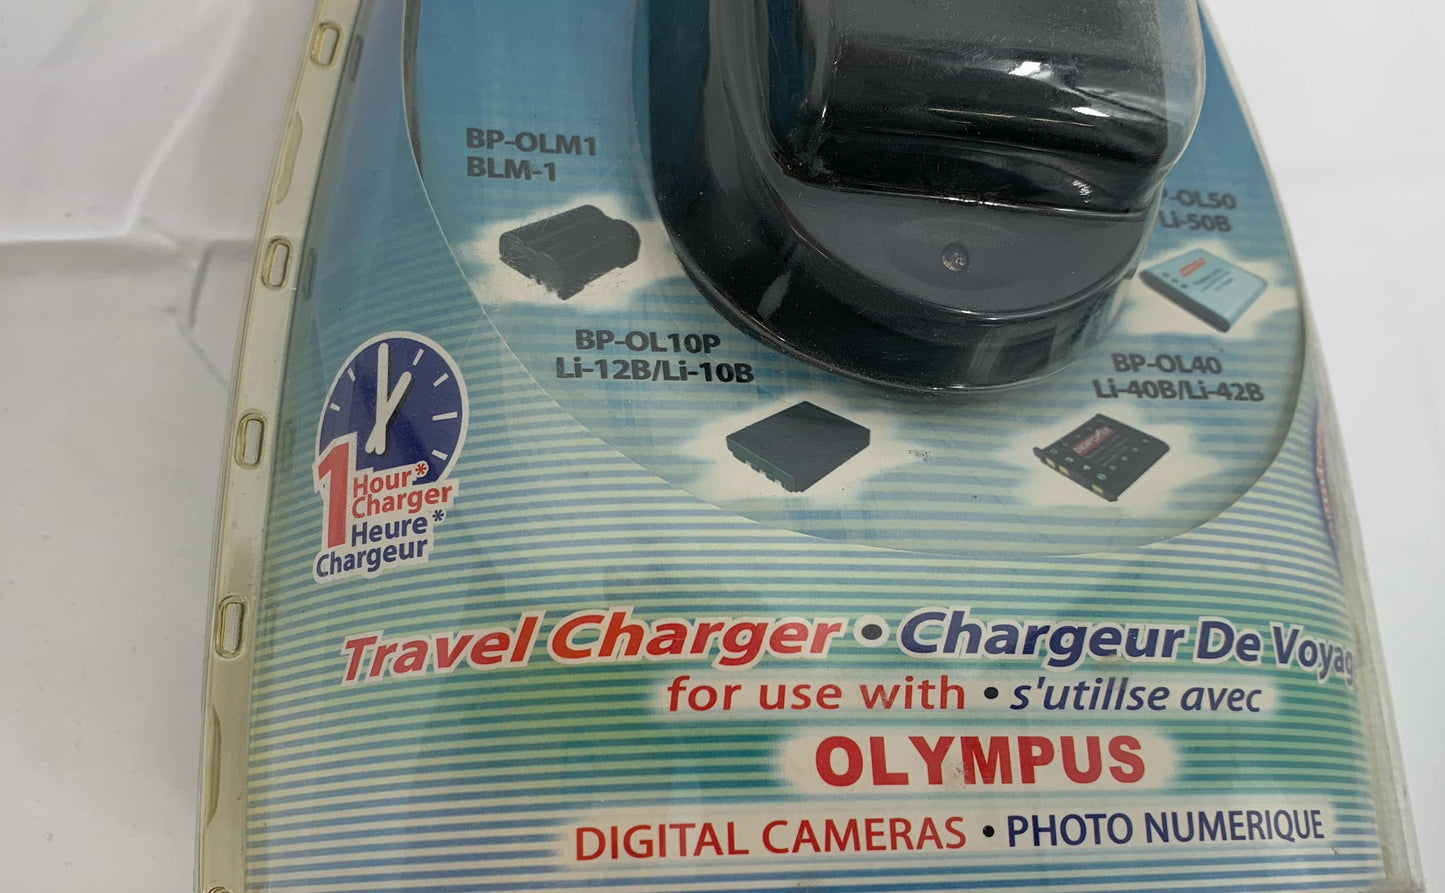 New Digipower Travel Charger For Olympus Digital Cameras TC-500O